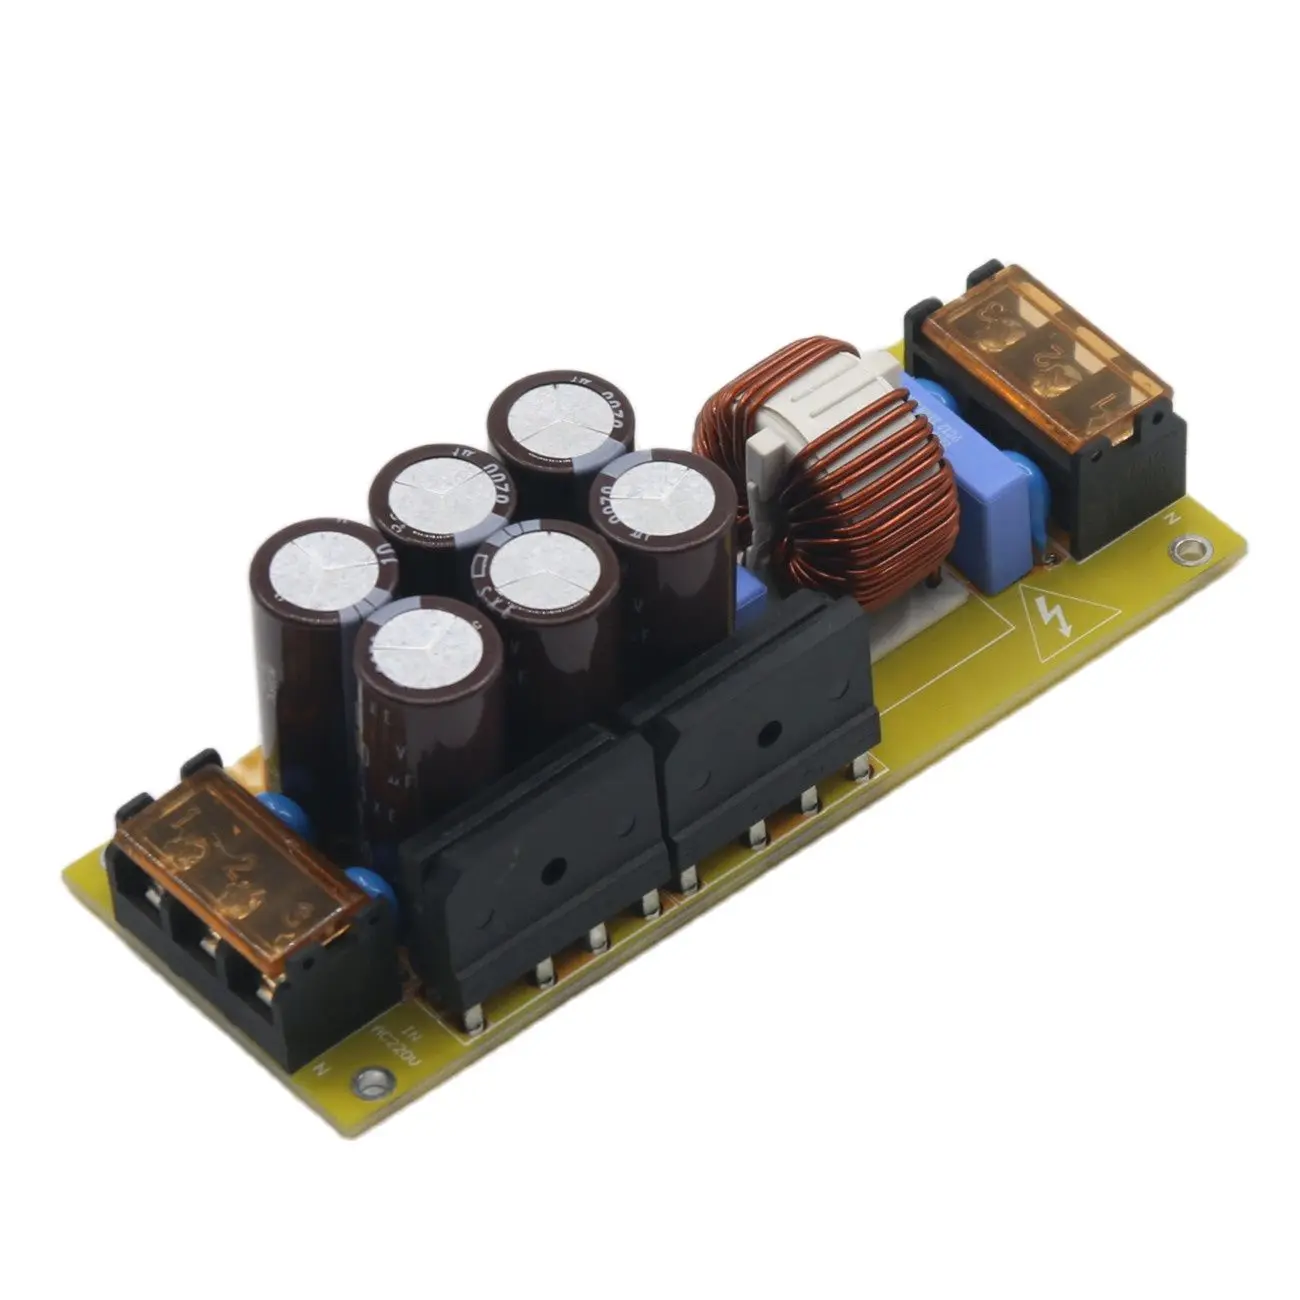 

AC Output Anti-Interference DC Lsolation Purification Power Supply Filter Board